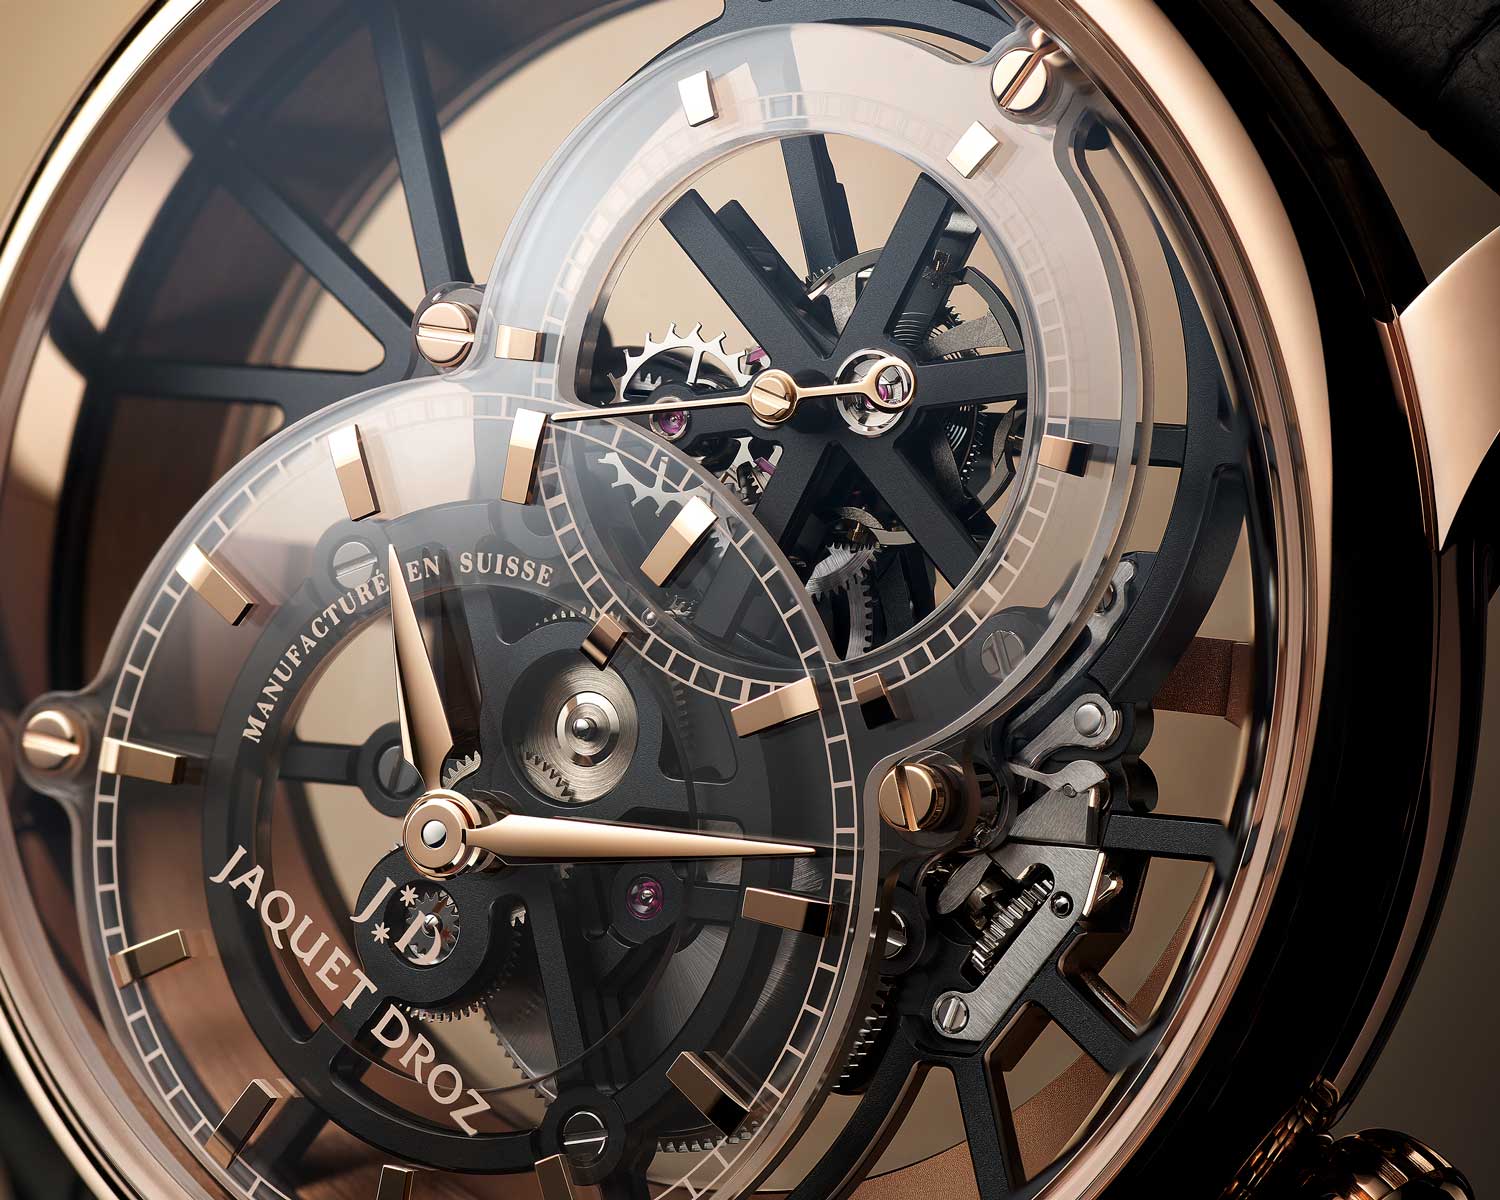 The tourbillon cage follows the geometry of the skeleton movement, with a triple cross shape which, once a minute, aligns perfectly with its bridges